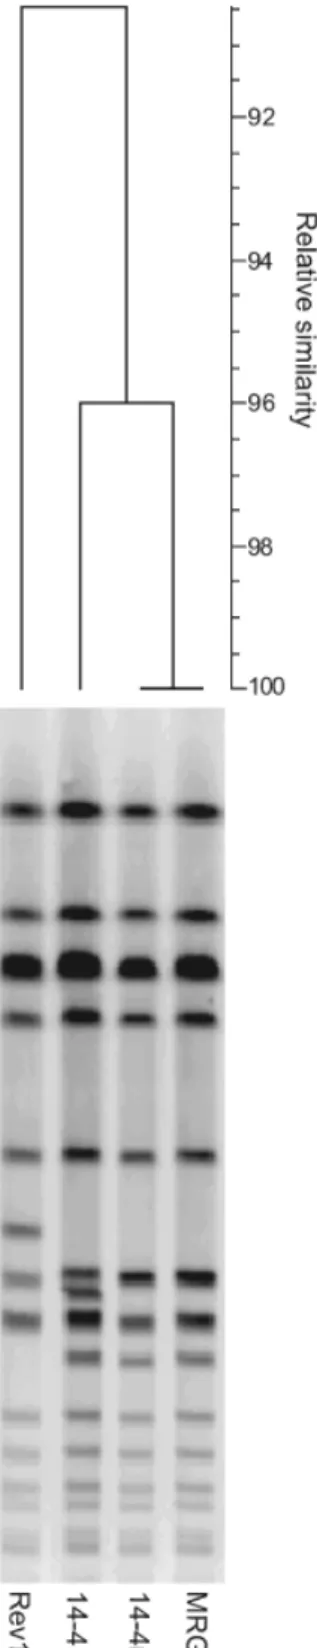 Figure 3 shows the PFGE patterns of the strains tested.